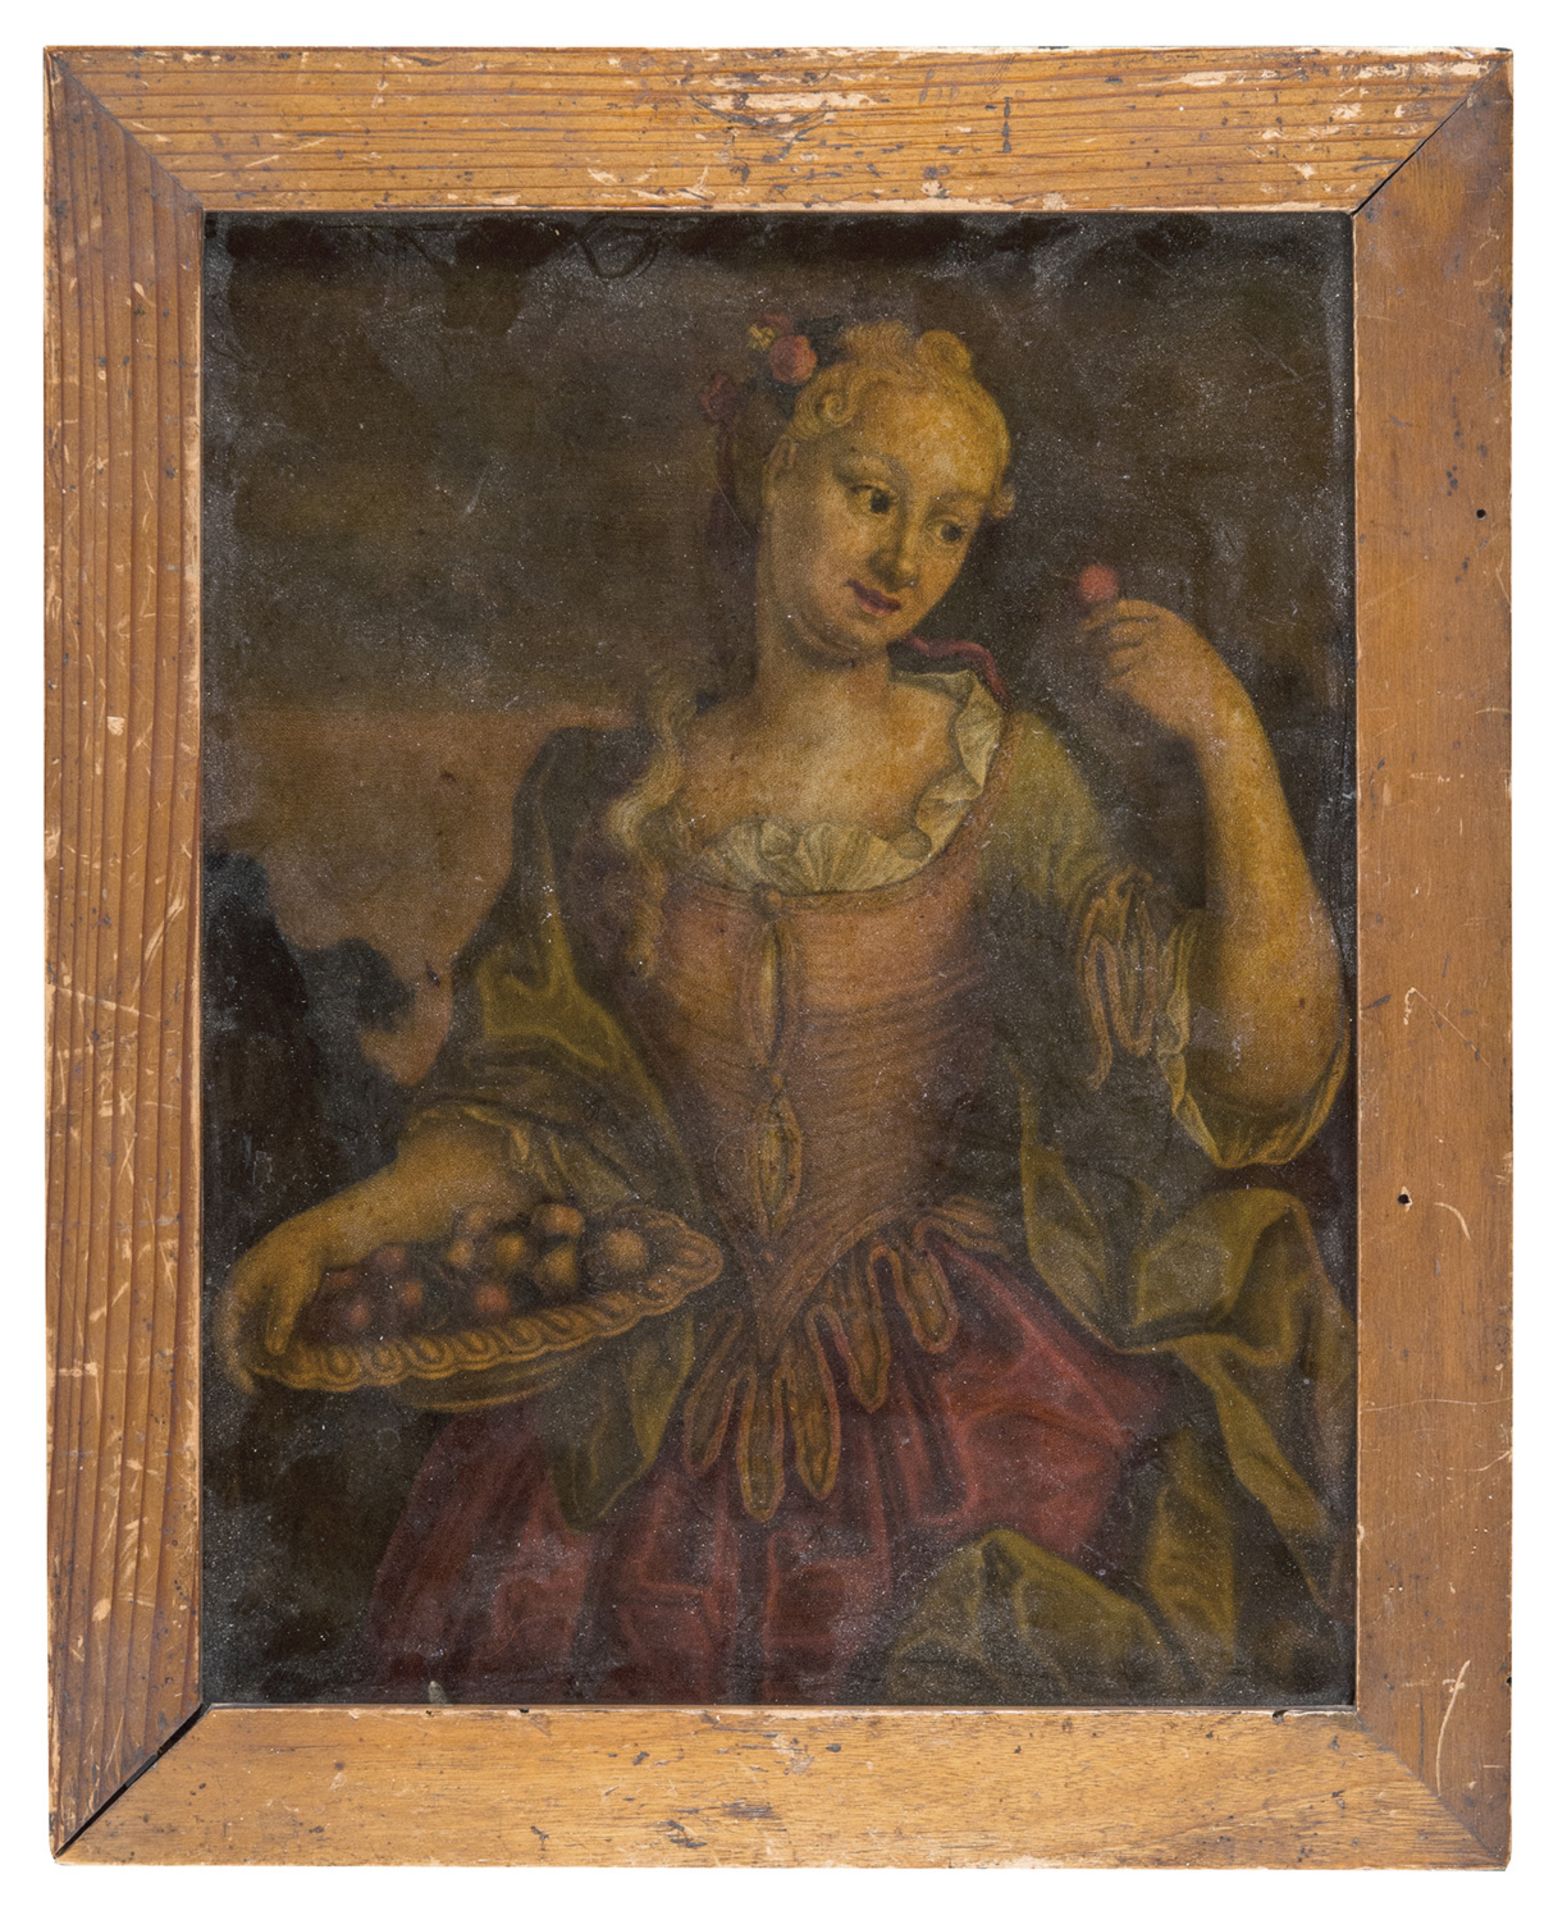 OIL PAINTING ON ENGRAVING APPLIED TO GLASS LATE 18TH CENTURY